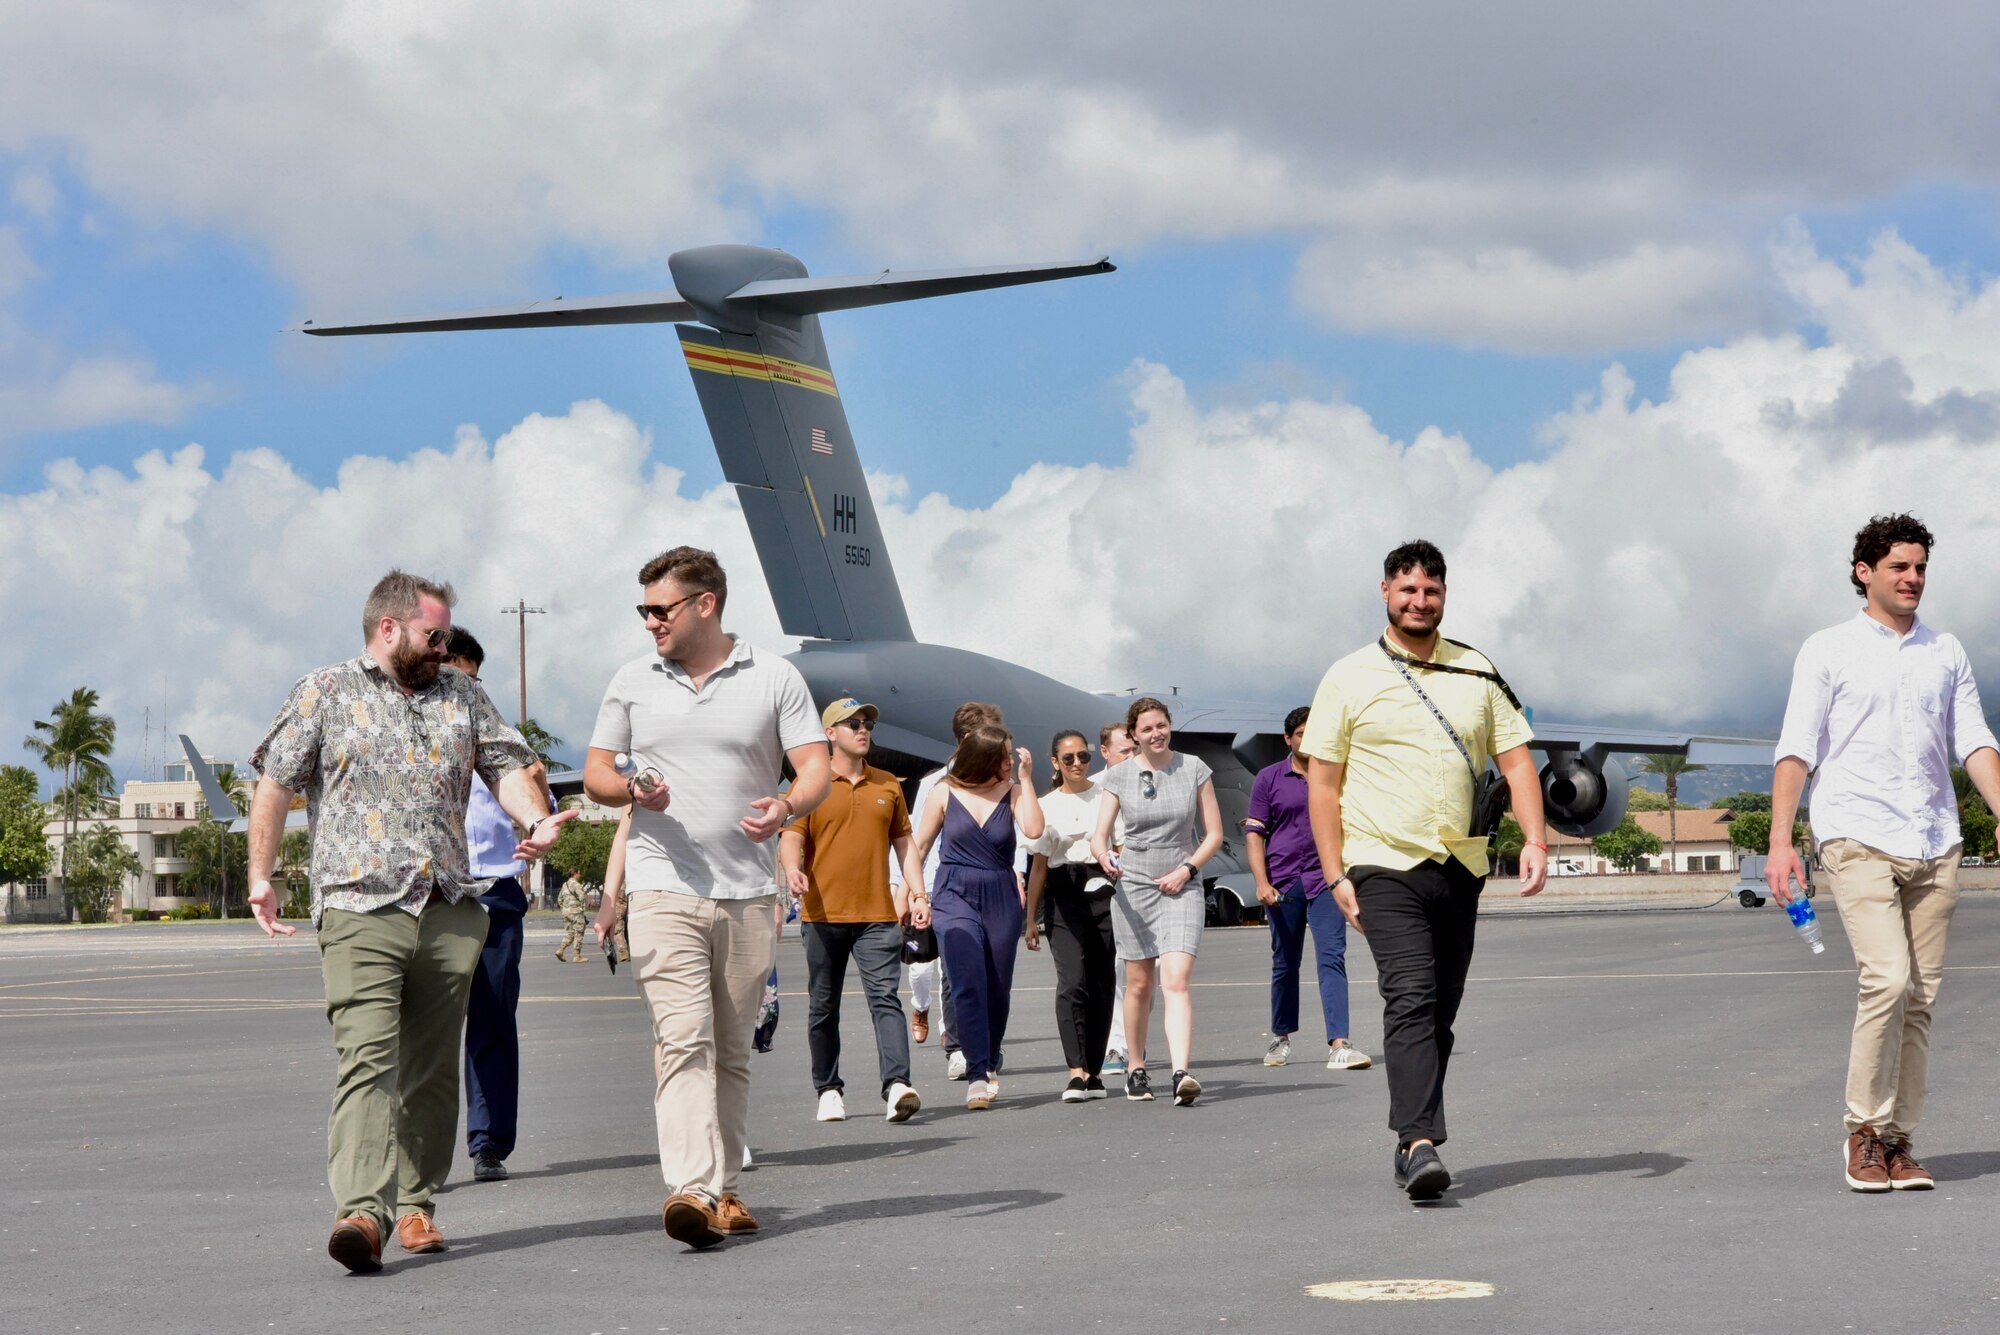 Students from the Duke University Grand American Strategy Program transit away from a C-17 Globemaster III static display after talking with Airmen as part of a base visit at Joint Base Pearl Harbor-Hickam, Hawaii, March 10, 2022. The Duke University Program in American Grand Strategy is a signature program for Duke students interested in national security policymaking.
(U.S. Air Force photo by 1st Lt. Benjamin Aronson)